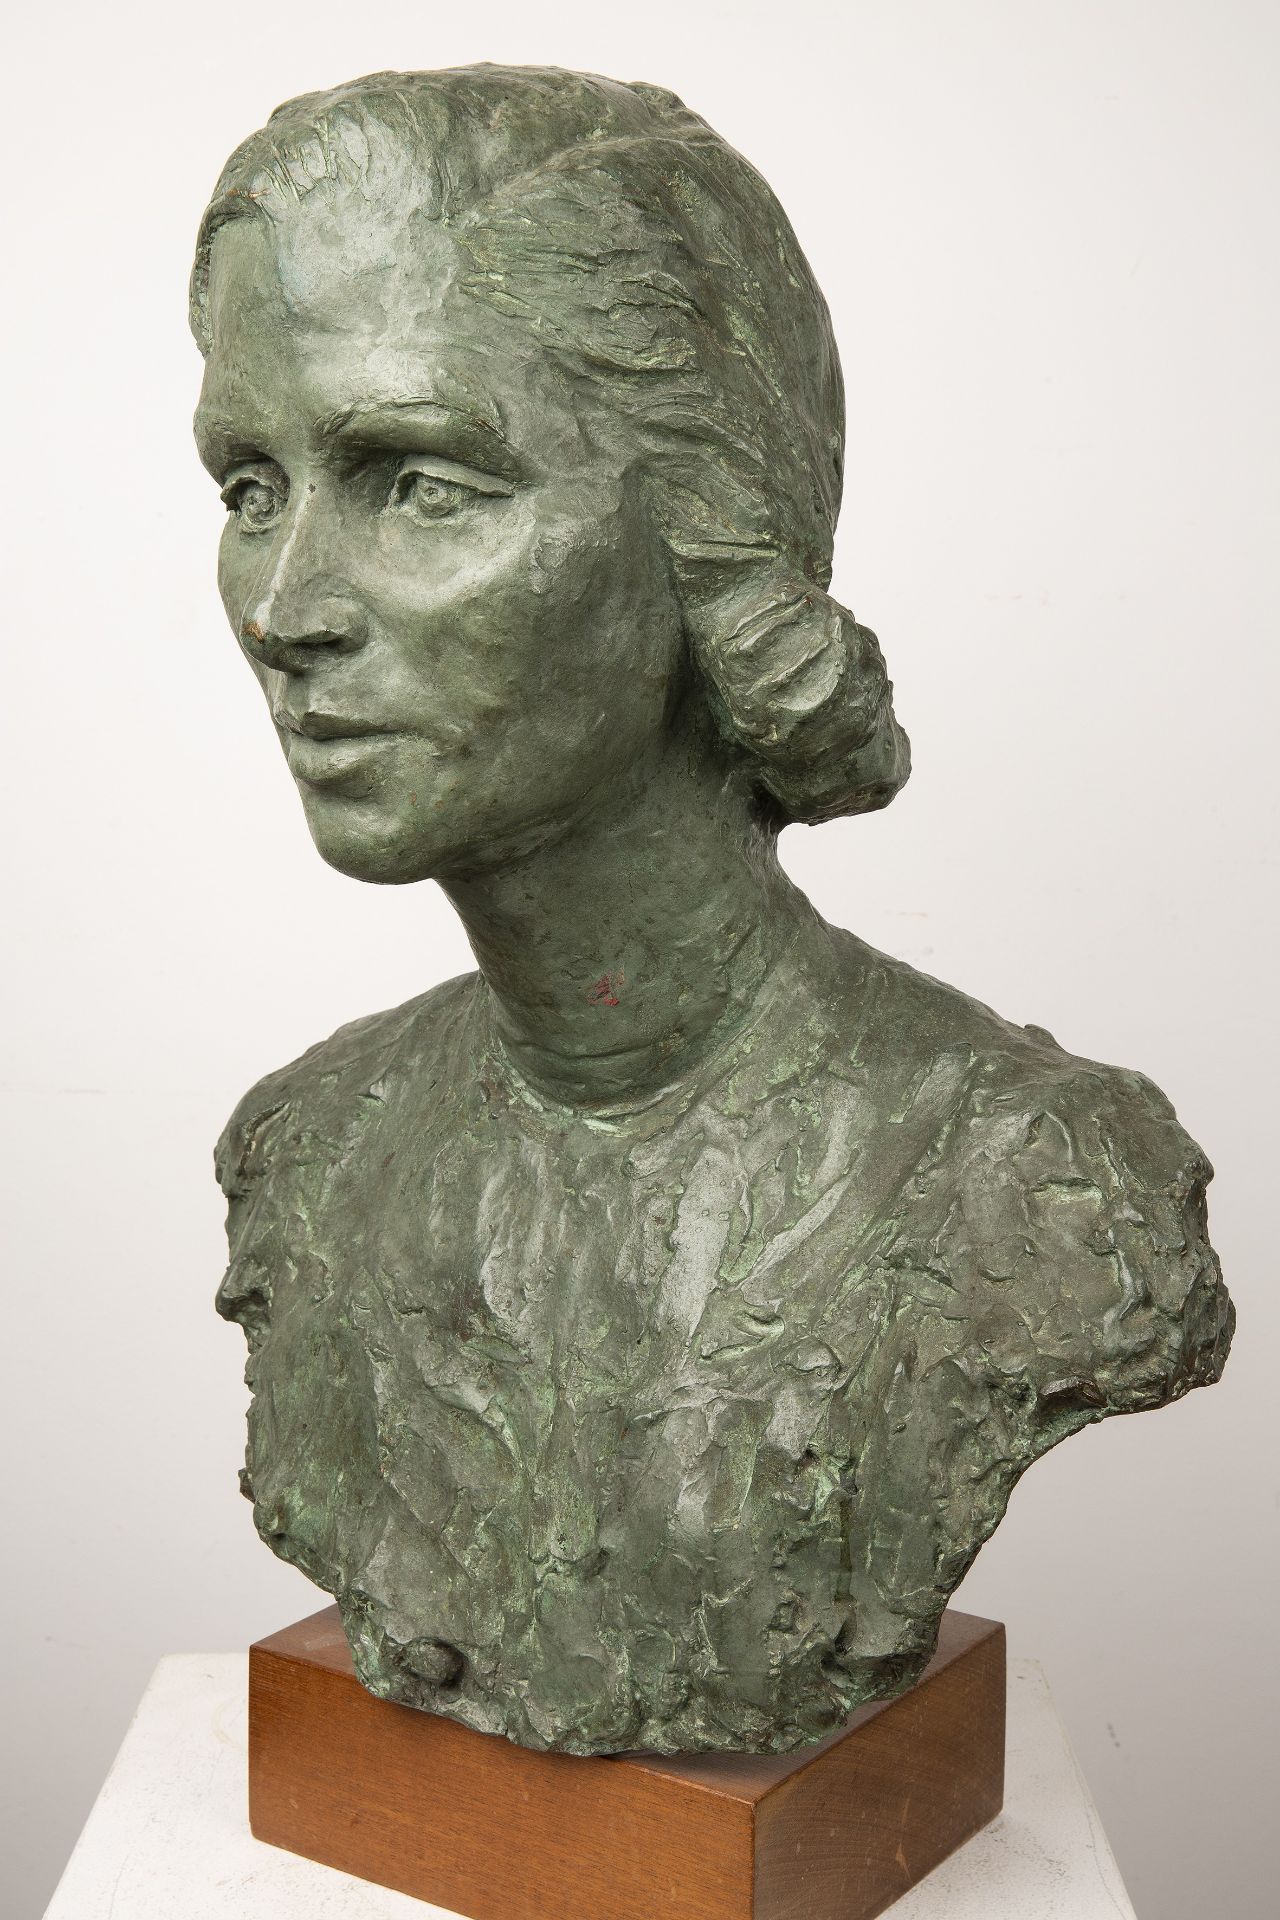 20th Century School 'Study of a lady' bronze bust, unsigned, on wooden plinth, 57cm high overall - Image 3 of 4